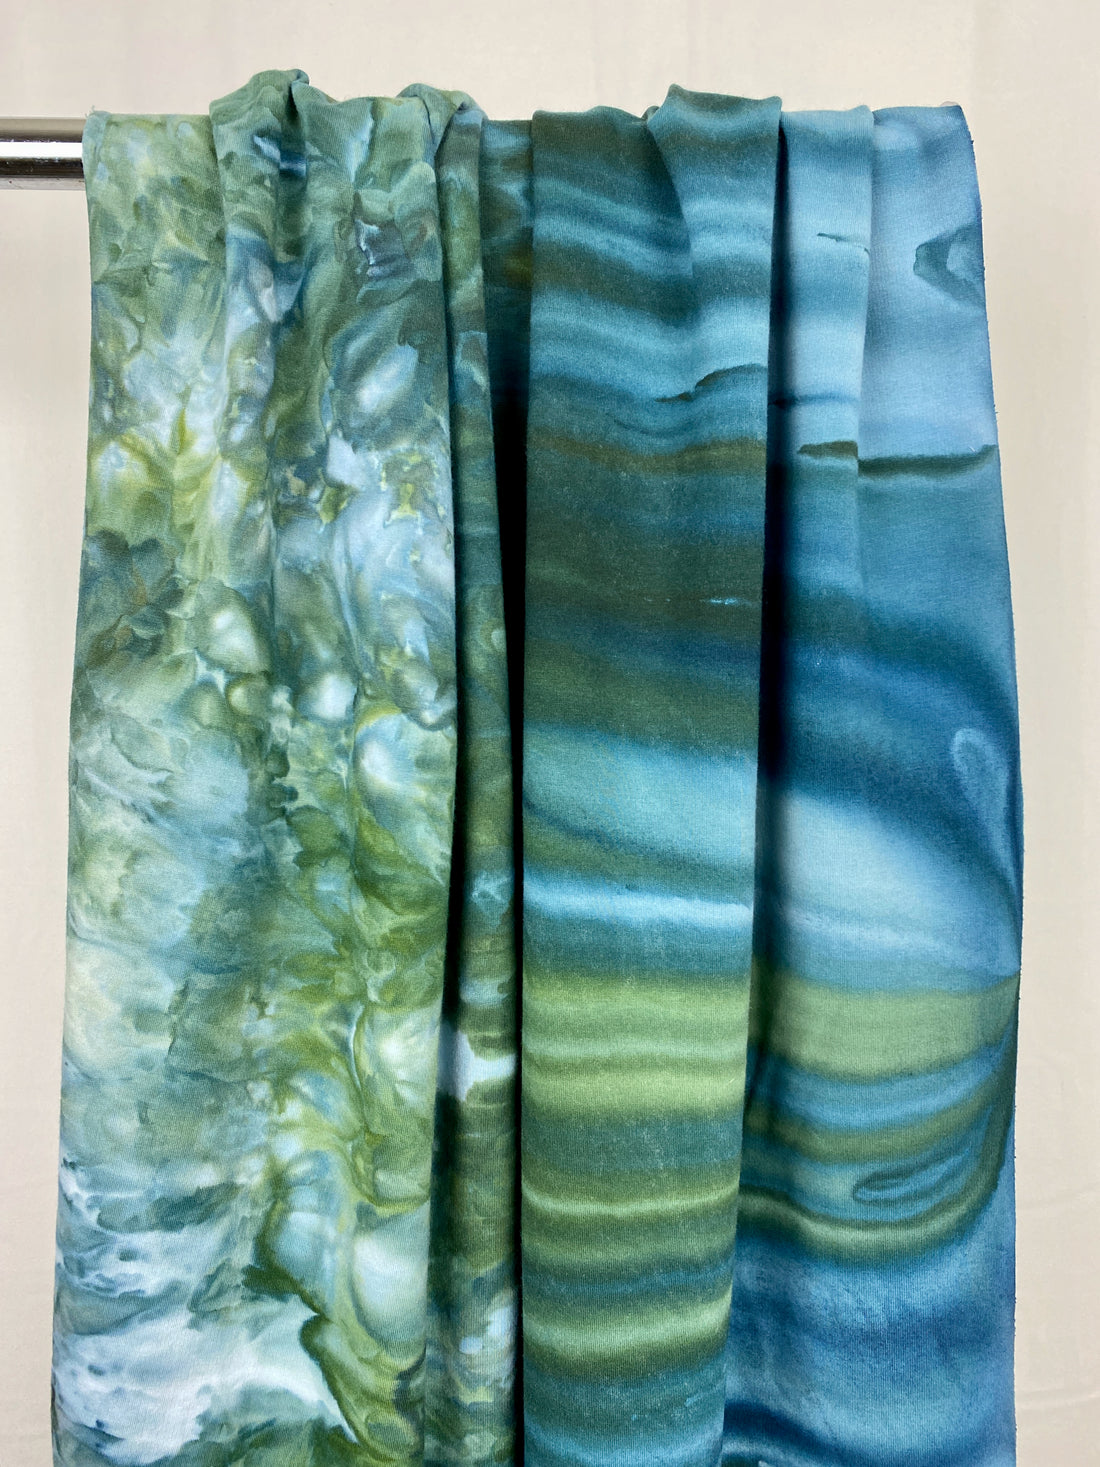 "Pacific Specific" The Ice-dyed collection inspired by the great Pacific Ocean